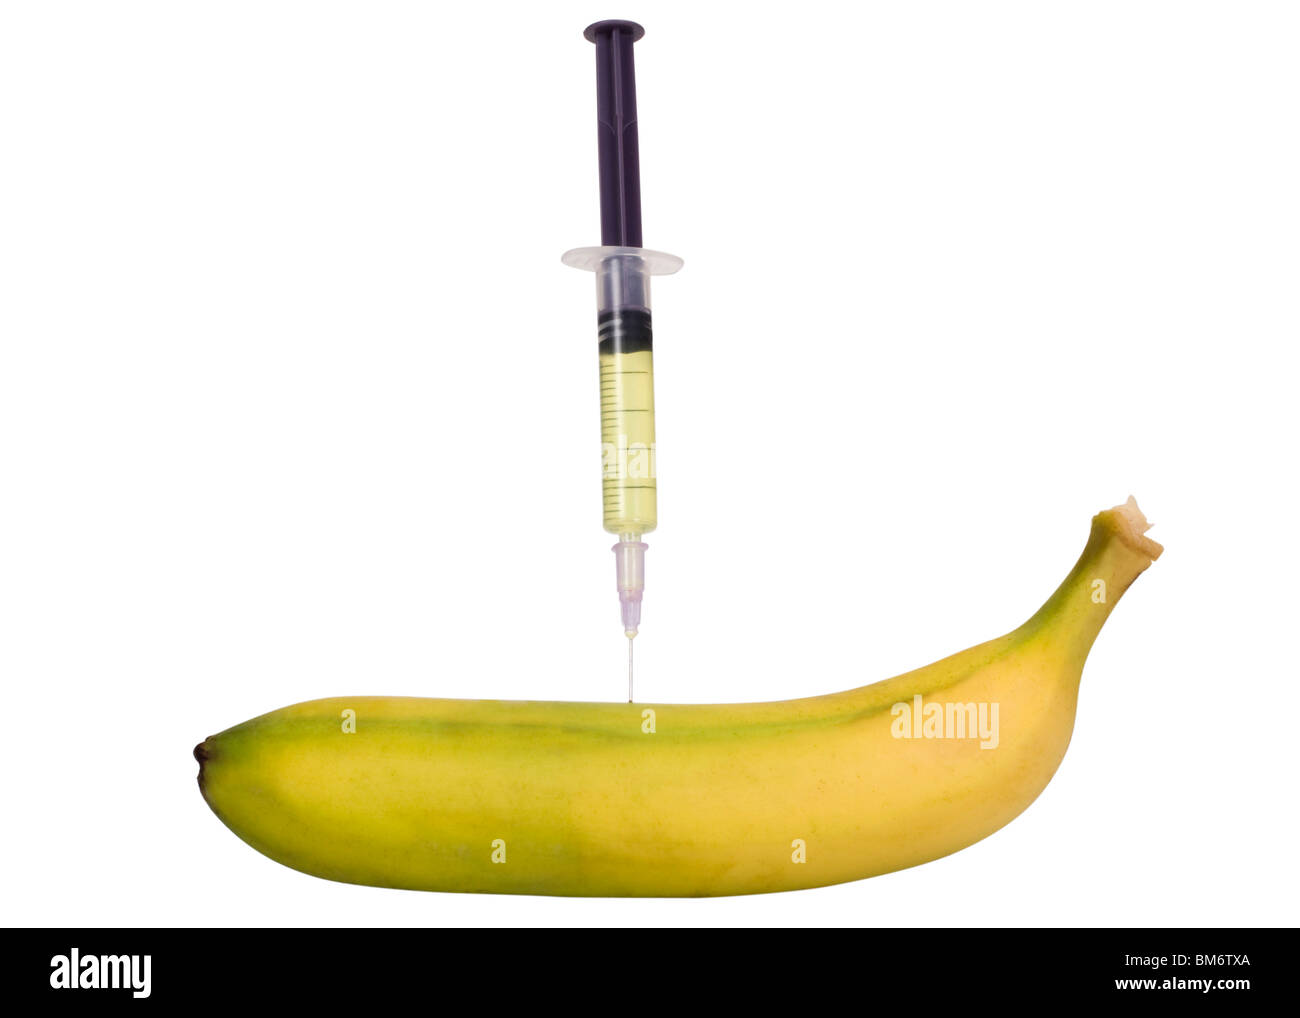 Syringe being injected into a banana Stock Photo